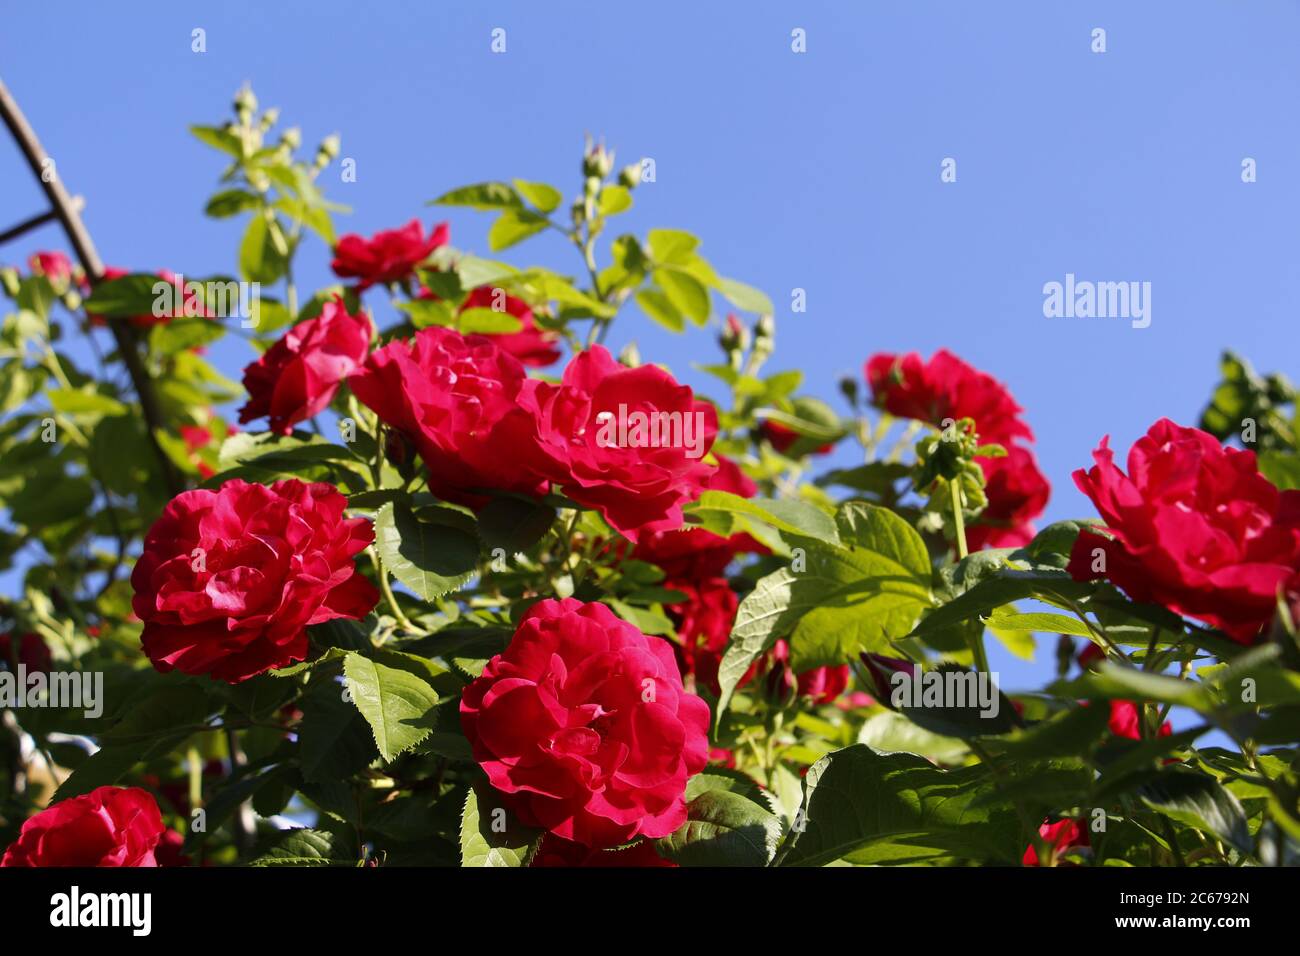 Beautiful red roses grow in the garden. Weaving roses. A lot of green leaves. Many red wild roses in nature. Stock Photo